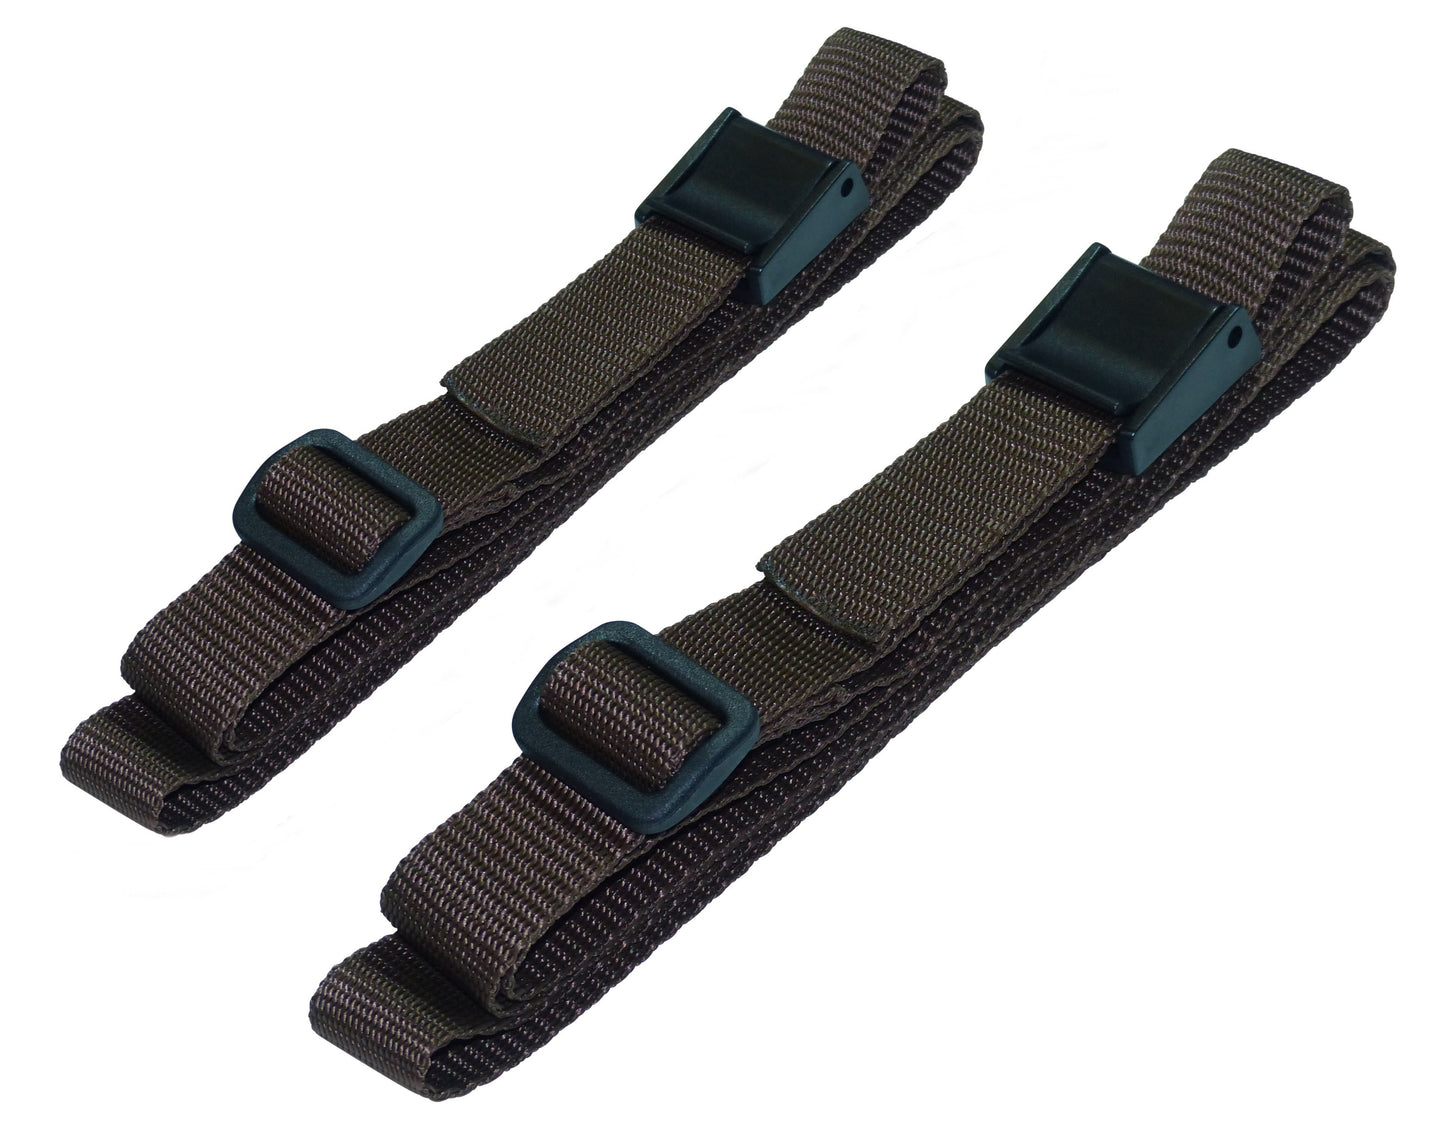 25mm Rivetted Strap with Plastic Cam Buckle & Triglide Buckles (Pair) in green